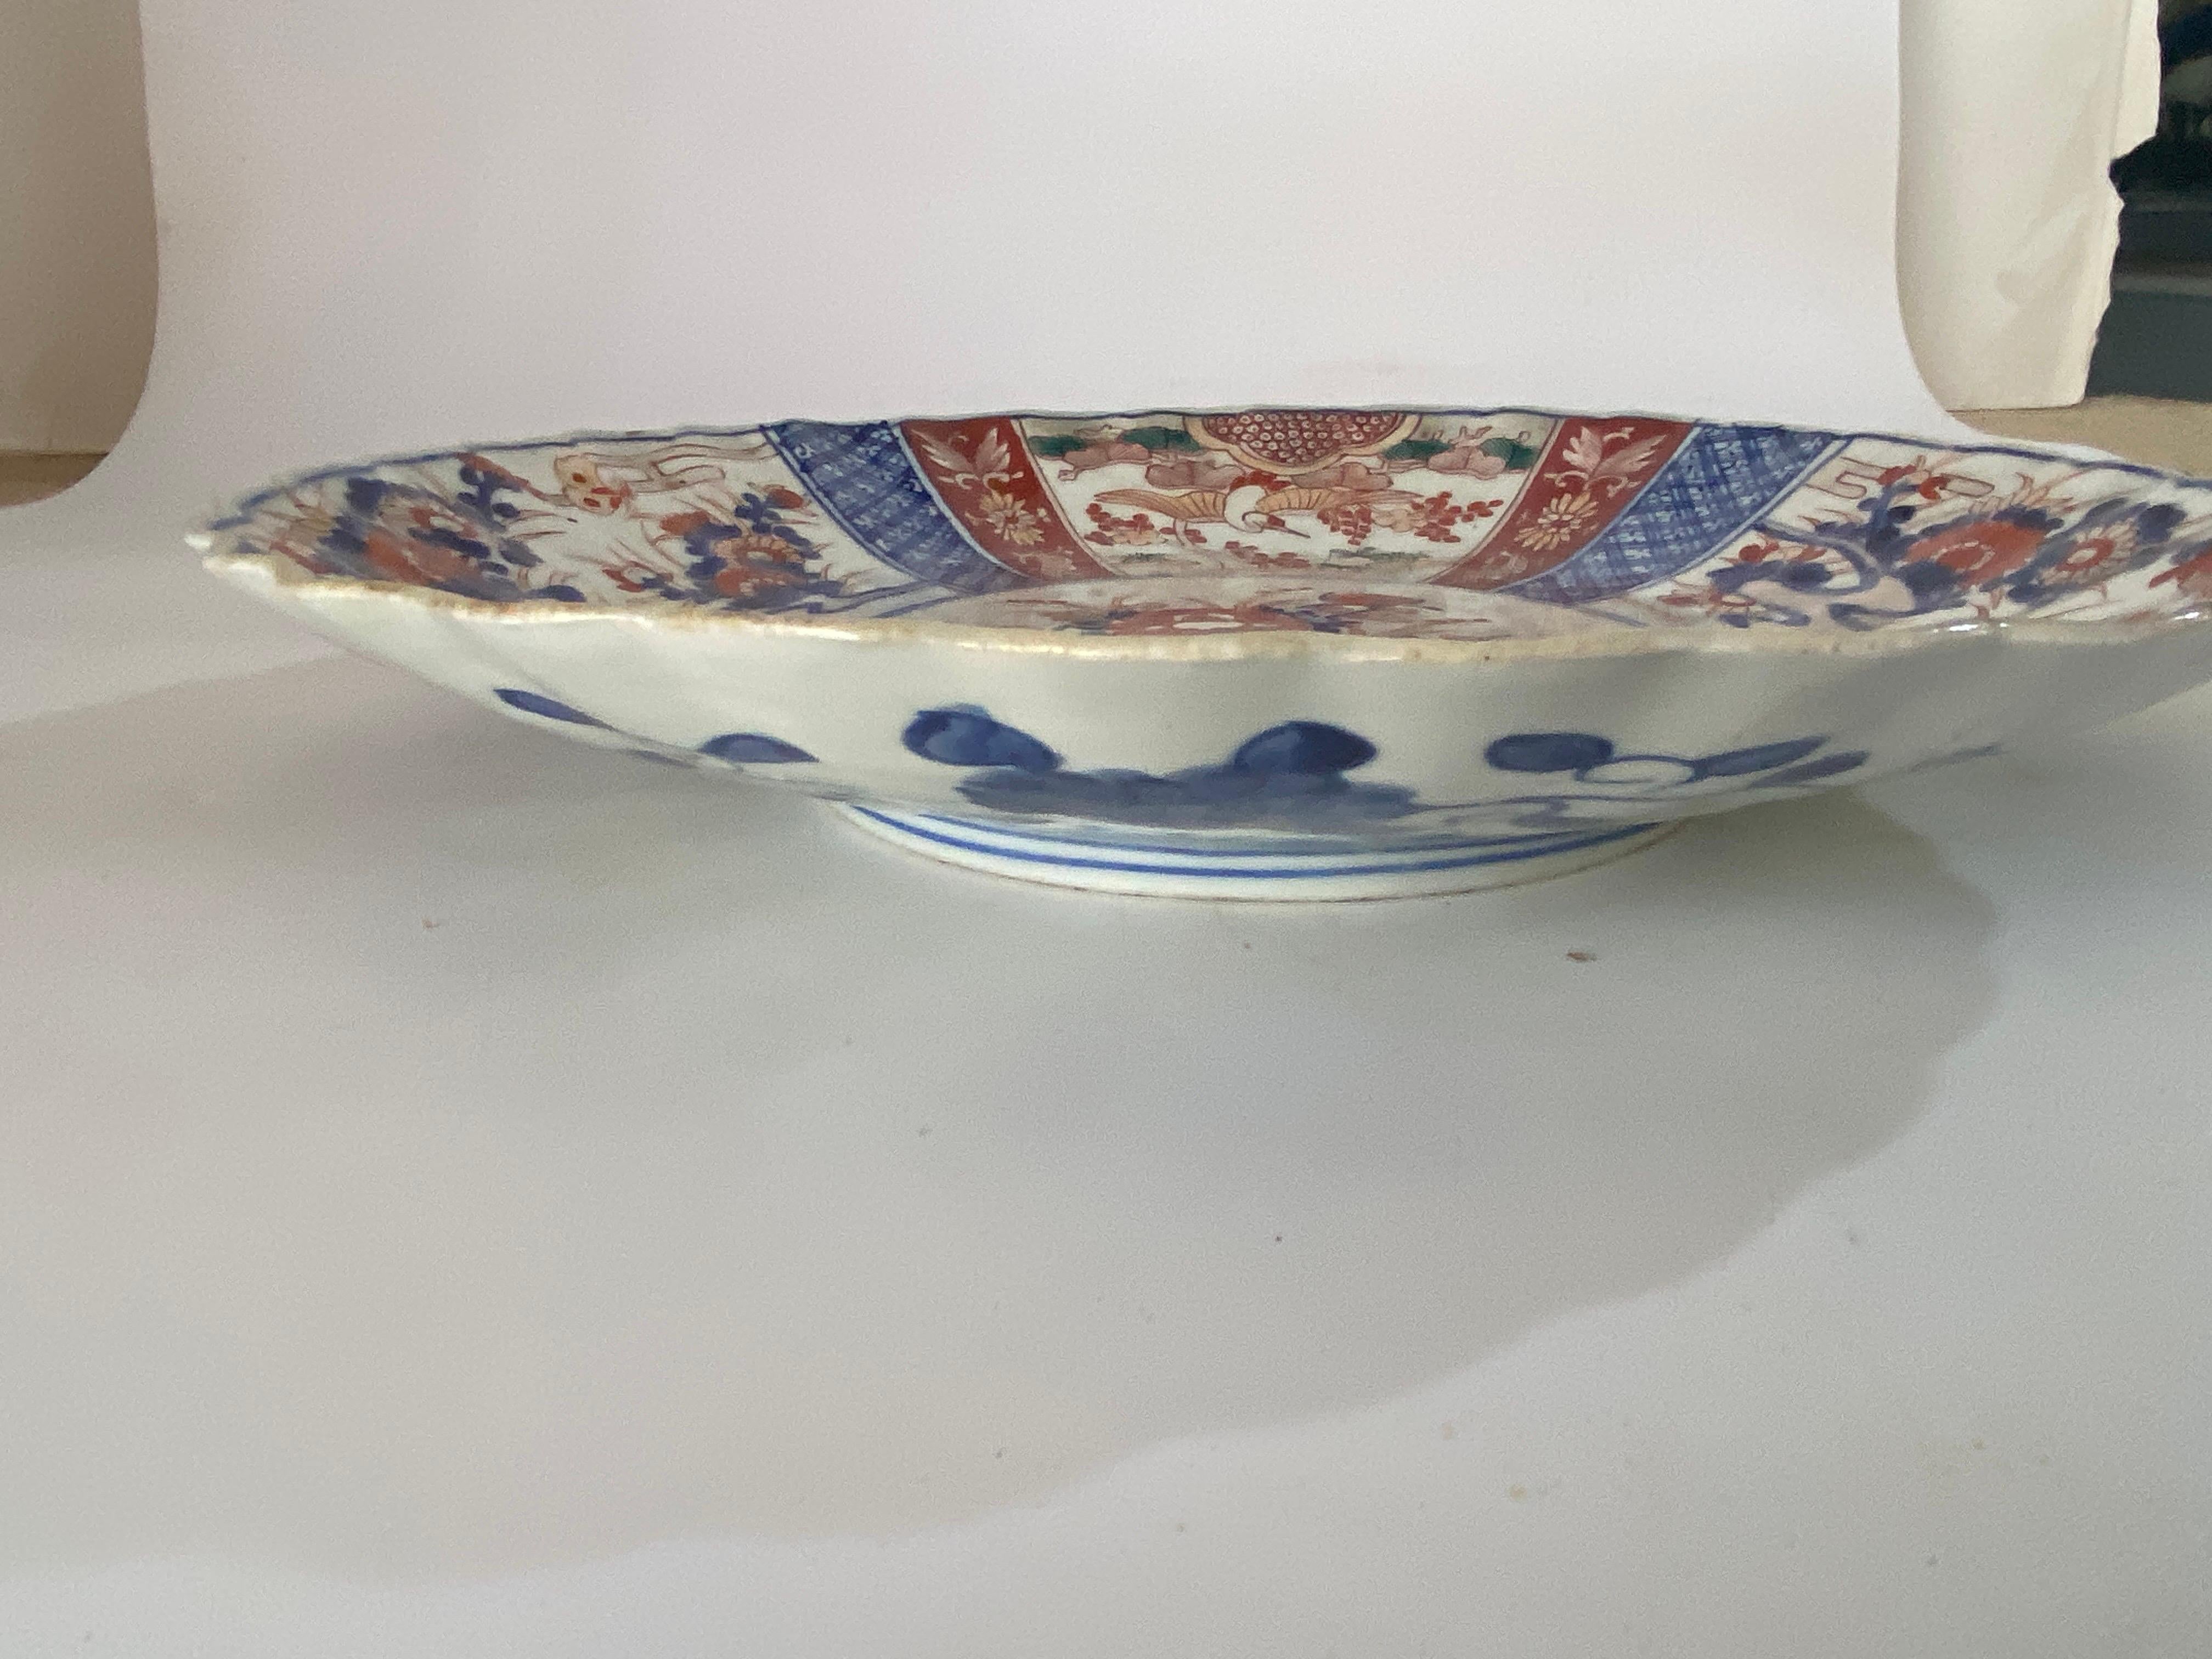 Japanese Dish or Charger, made in Japan at the beginning of the 19th century. With beautiful colors in red blue and white. The Item is in good condition.